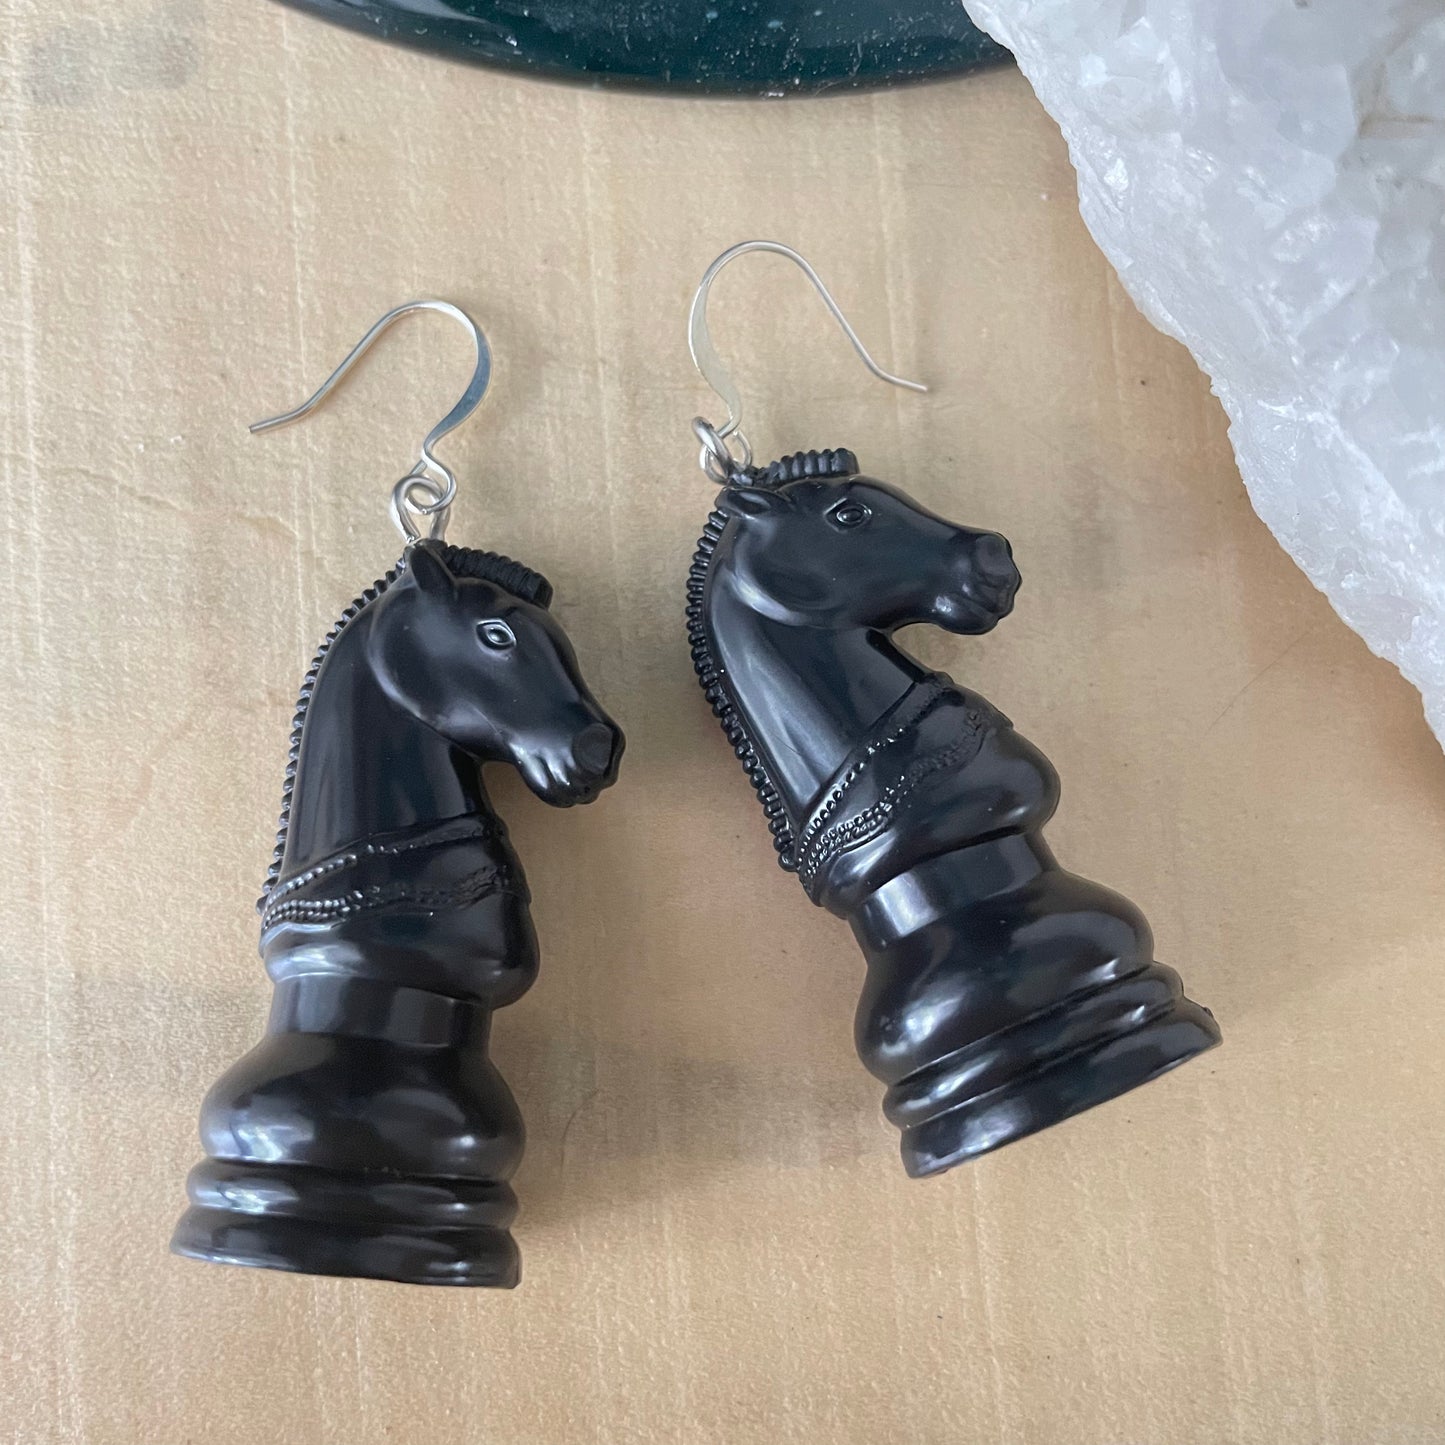 Black Chess Knight Horse Earrings 2.25”Lightweight Repurposed Upcycled